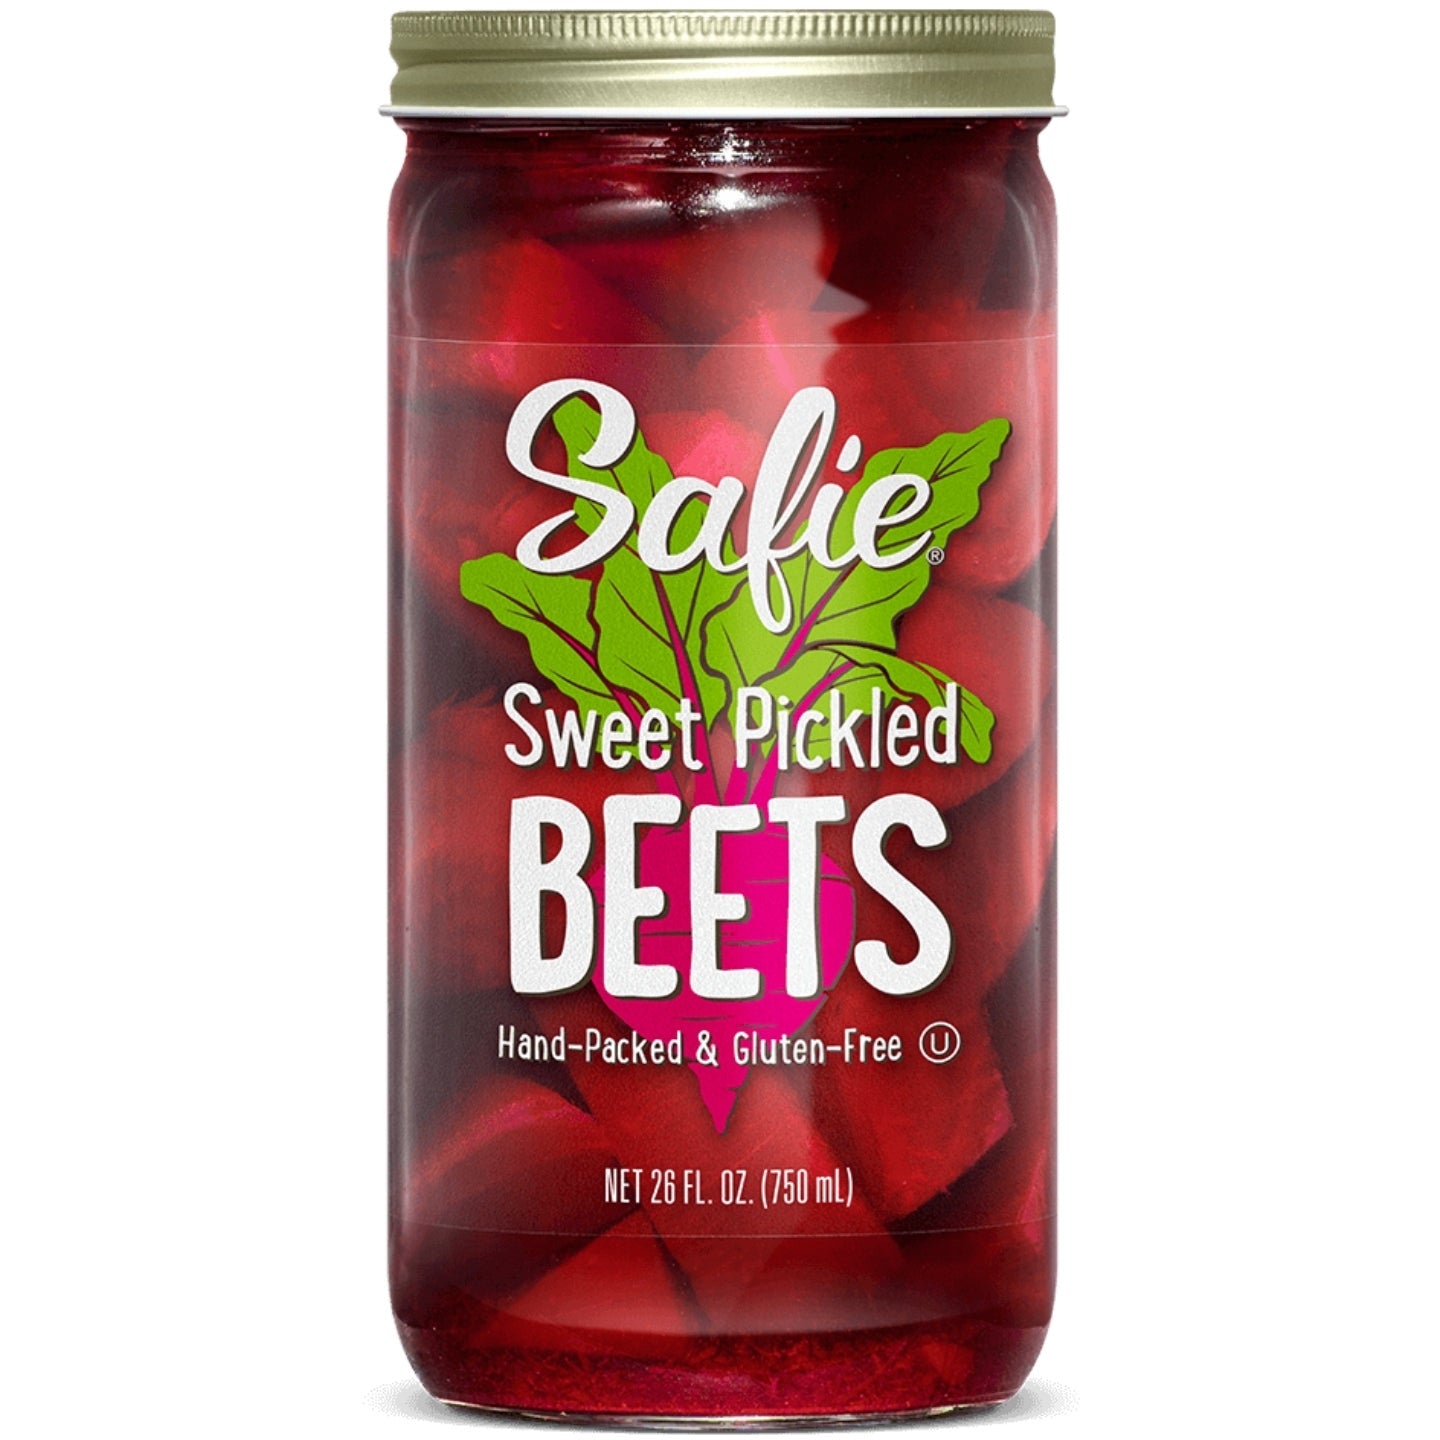 Safie Sweet Marinated Beets 1L